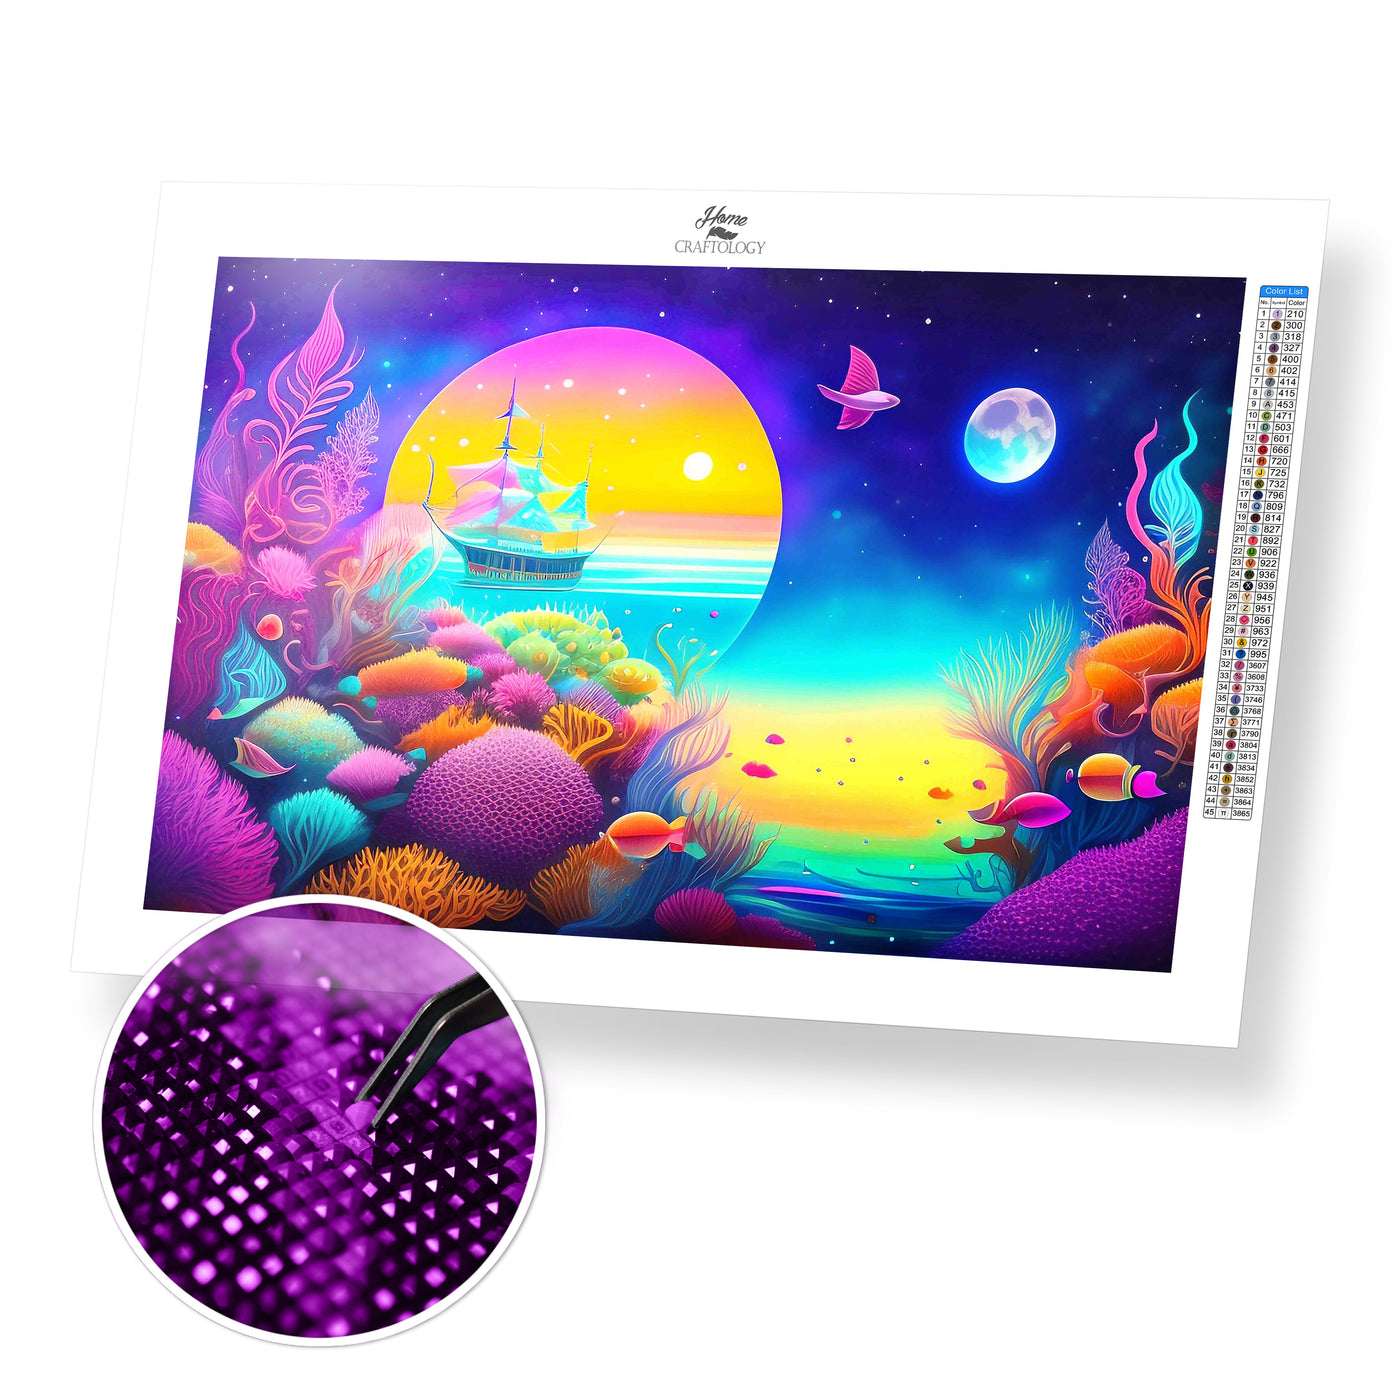 Under and Over the Sea - Premium Diamond Painting Kit